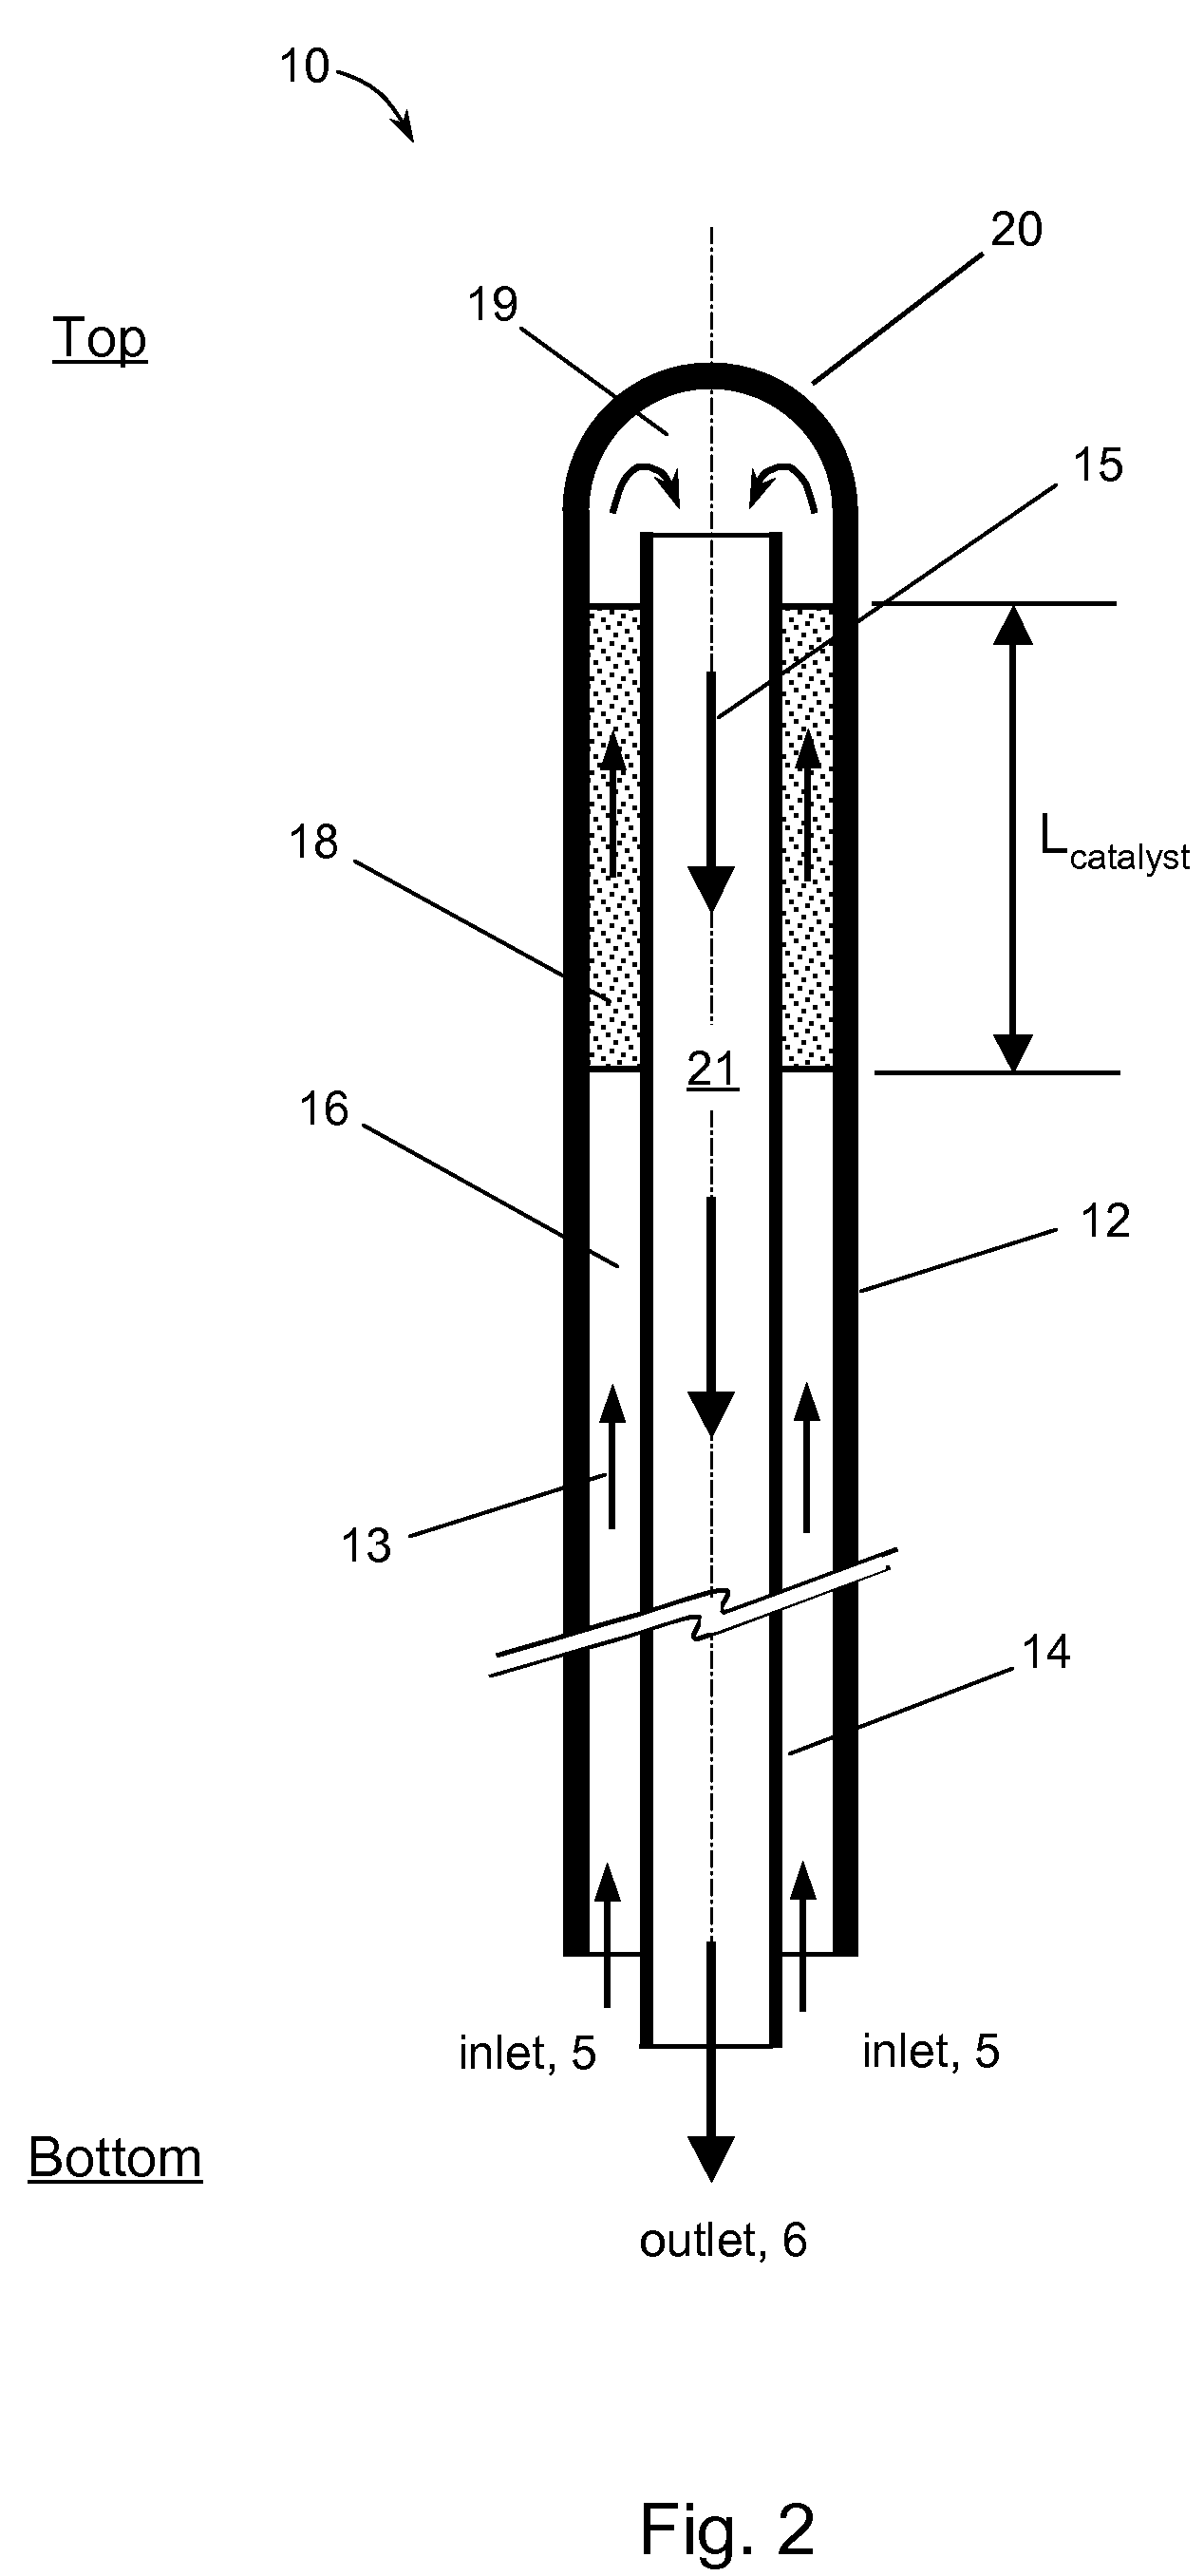 Integrated boiler, superheater, and decomposer for sulfuric acid decomposition